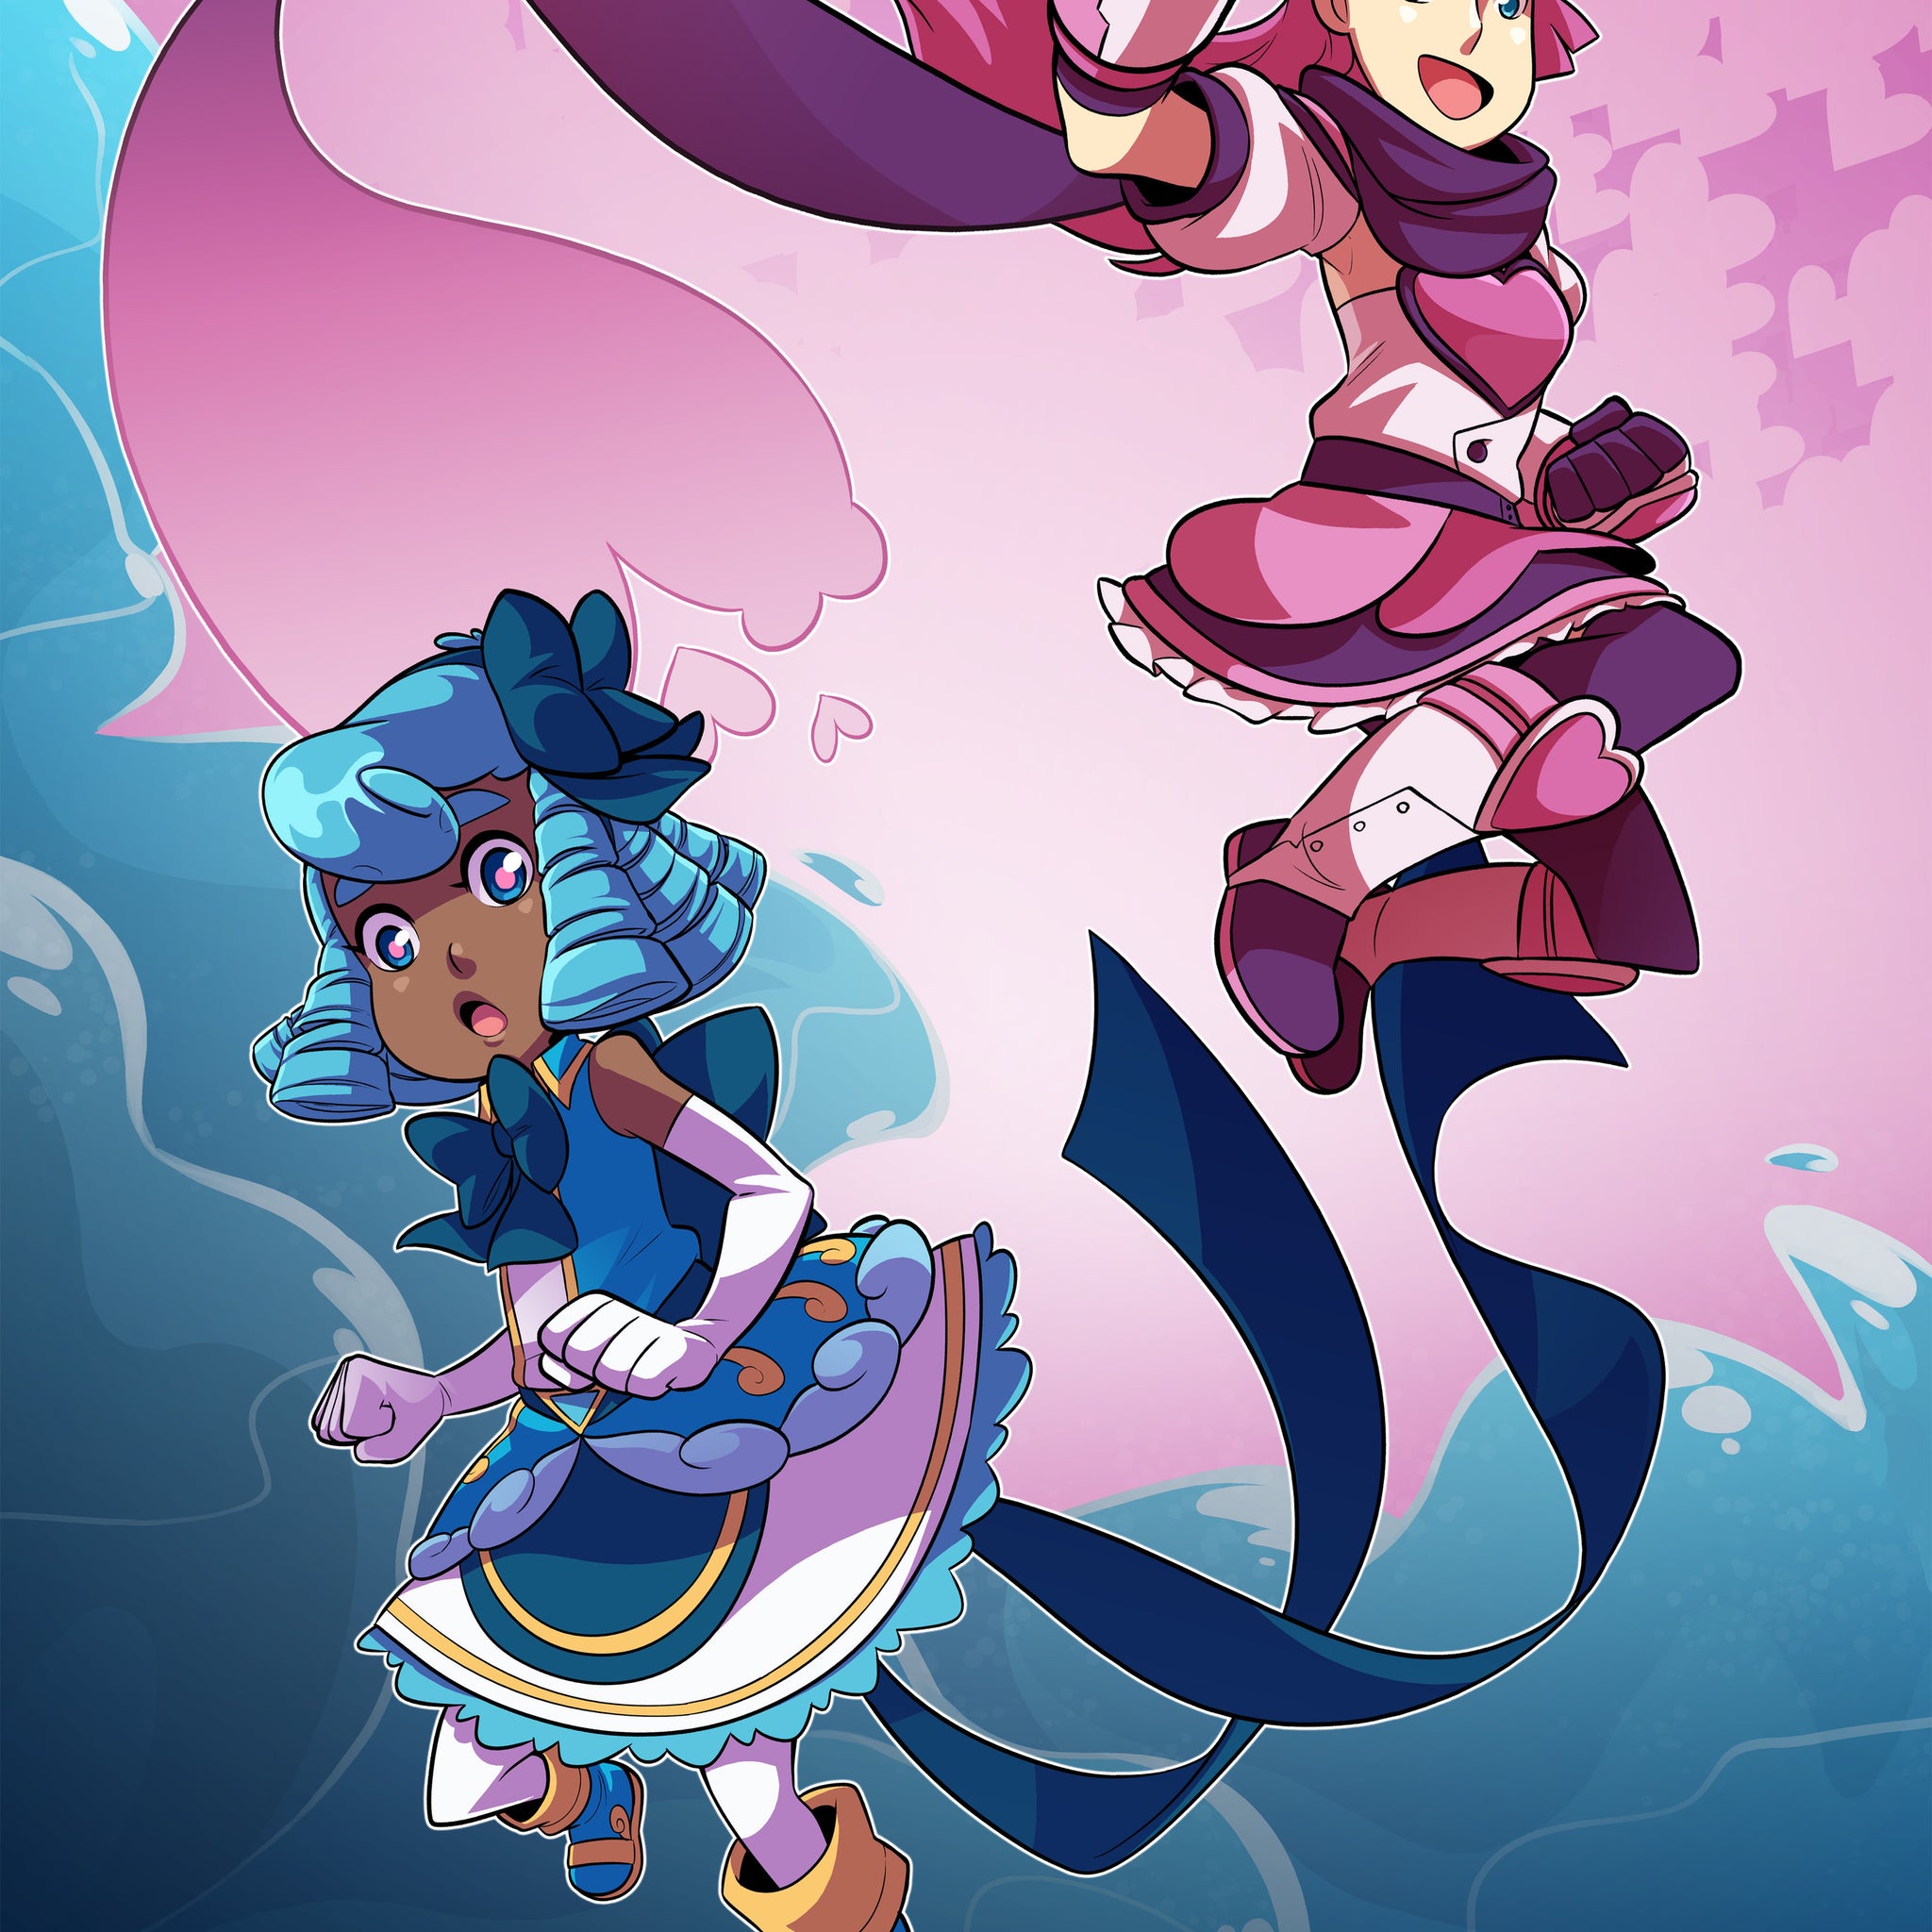 Undine and Heartful Punch from Sleepless Domain - Webcomic Merchandise 